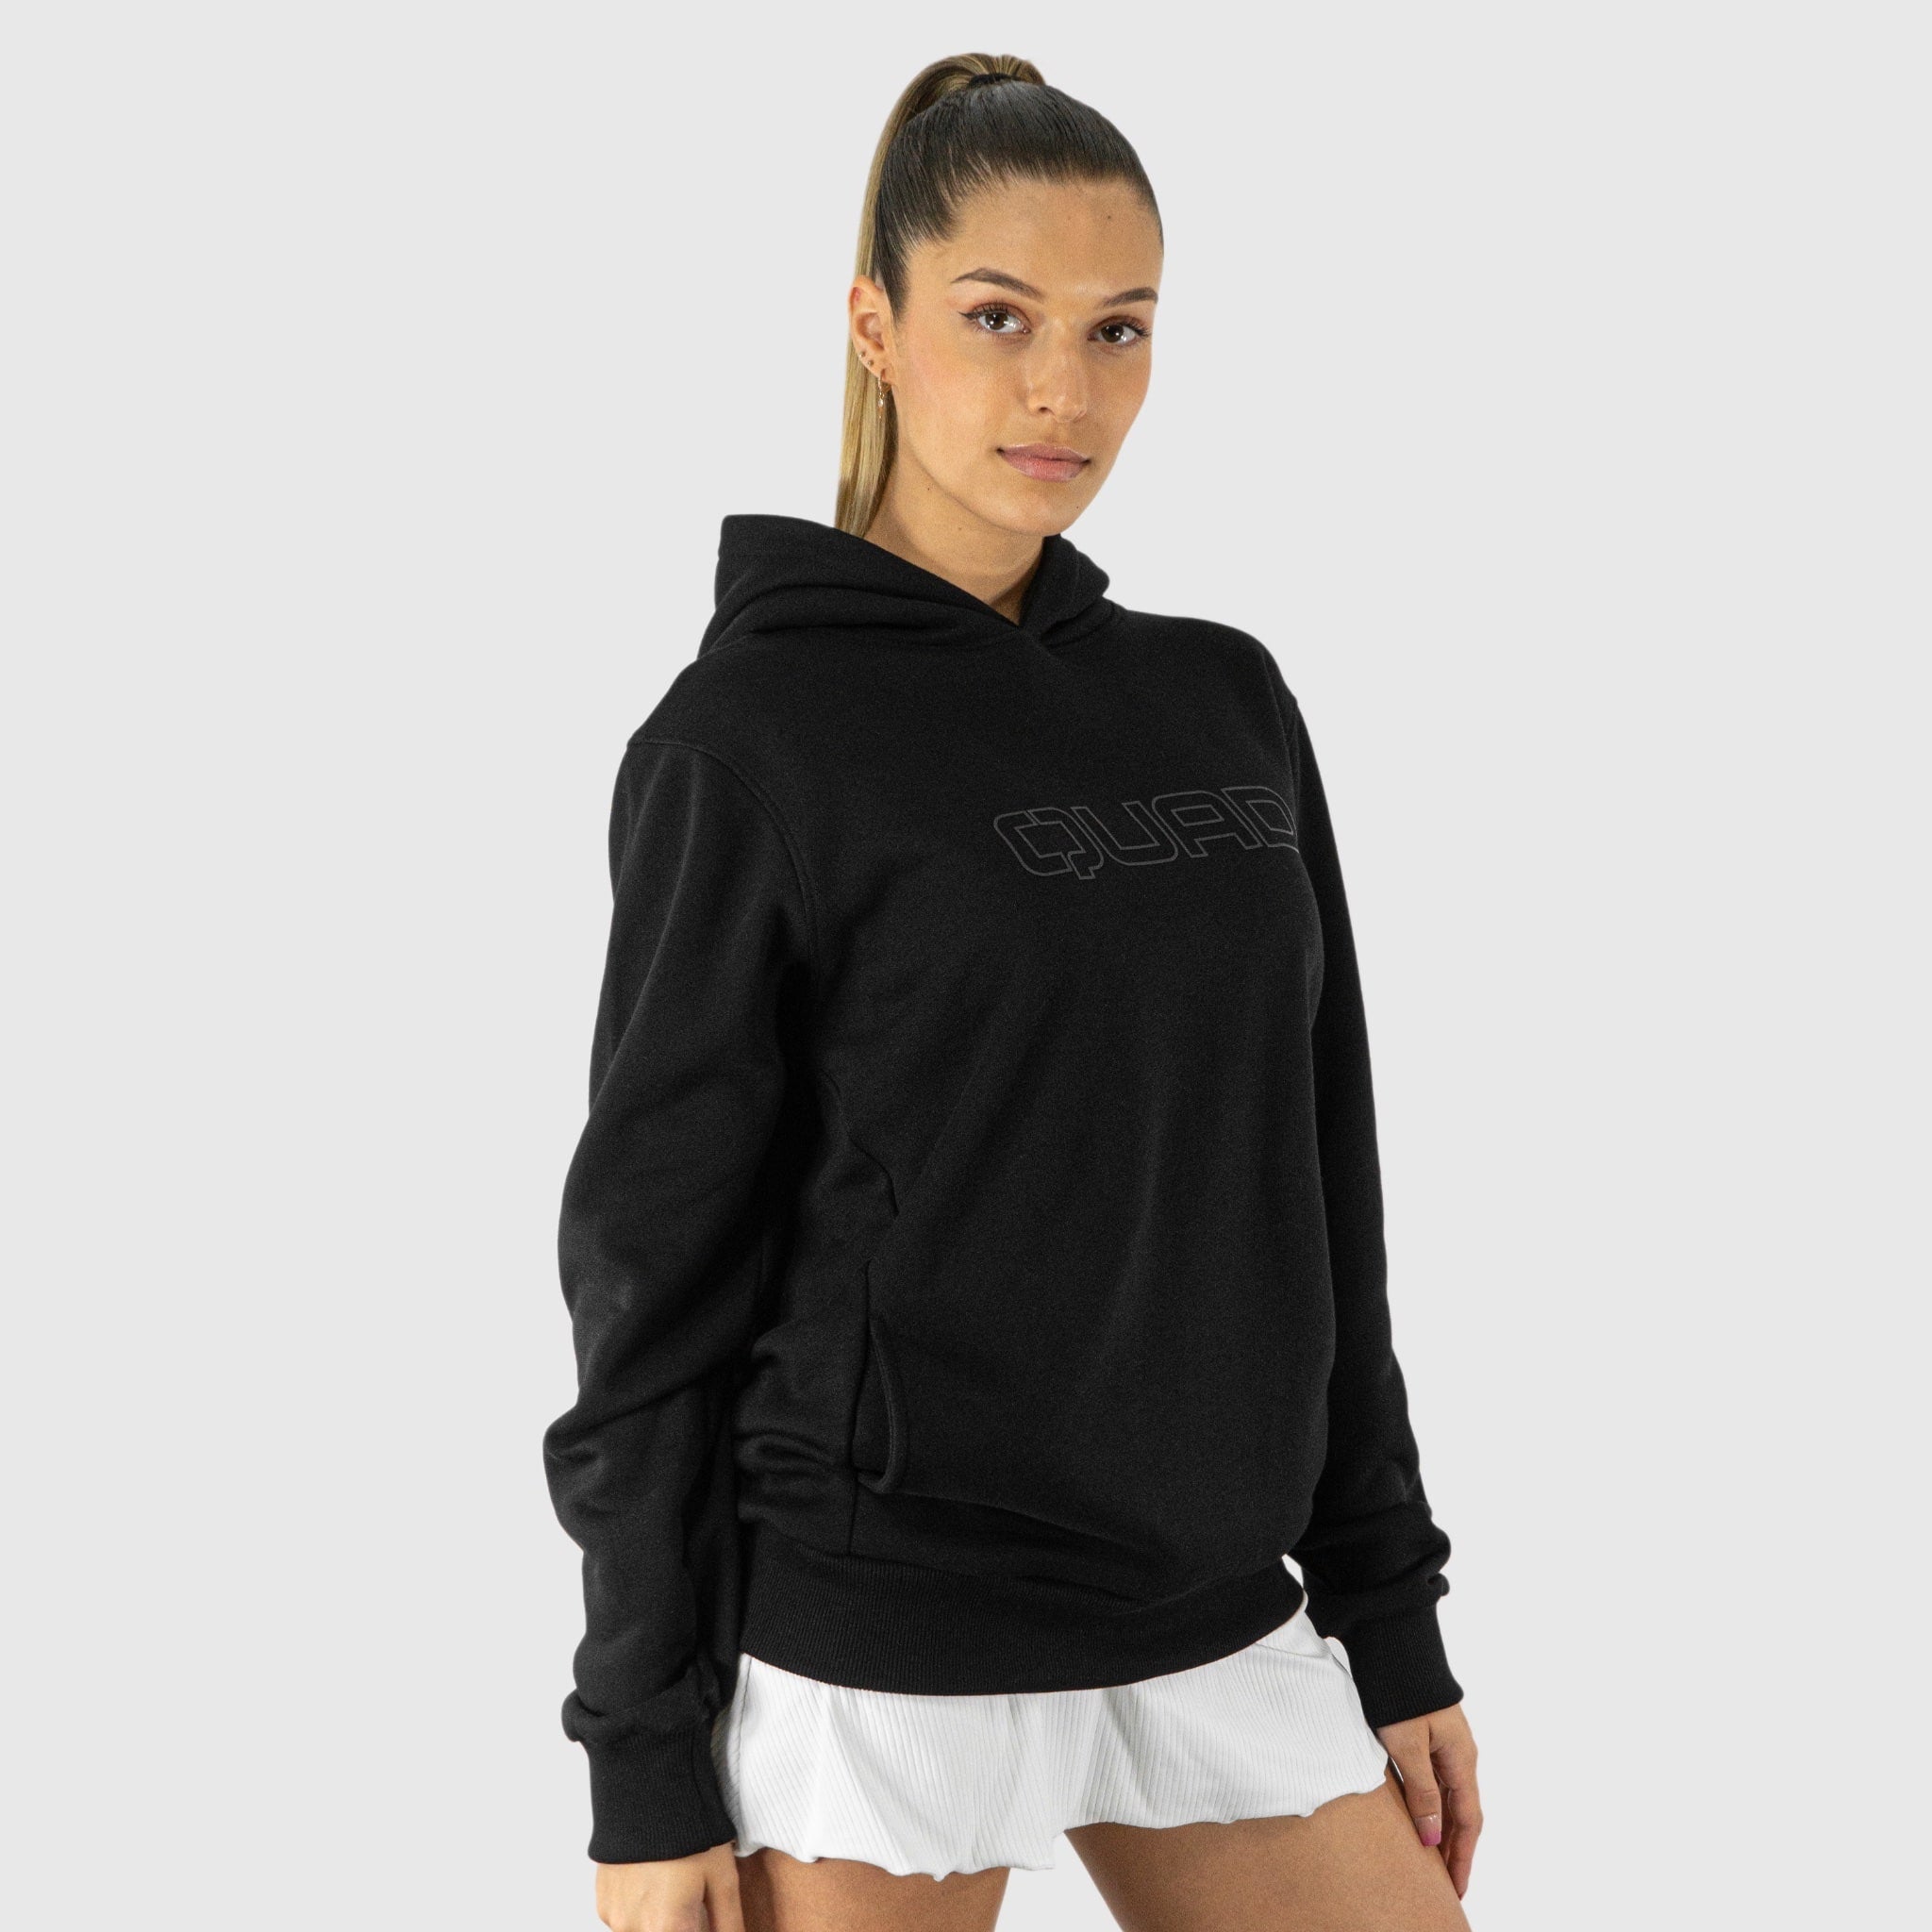 Quad Padel Essential hoodie woman right view